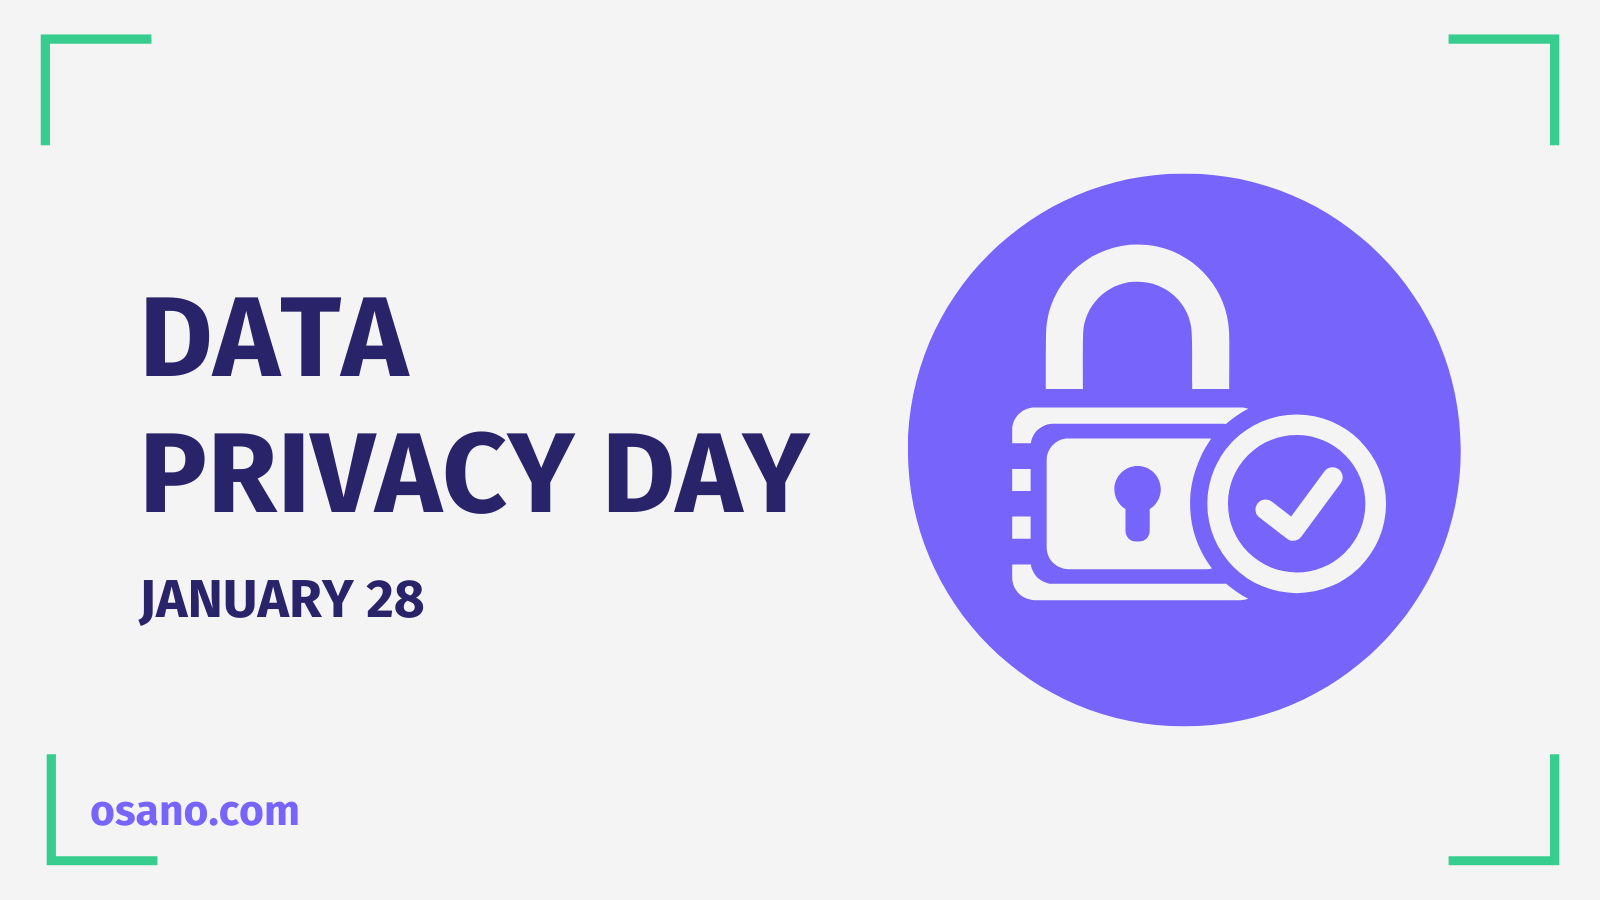 What is Data Privacy Day and how can you celebrate it?